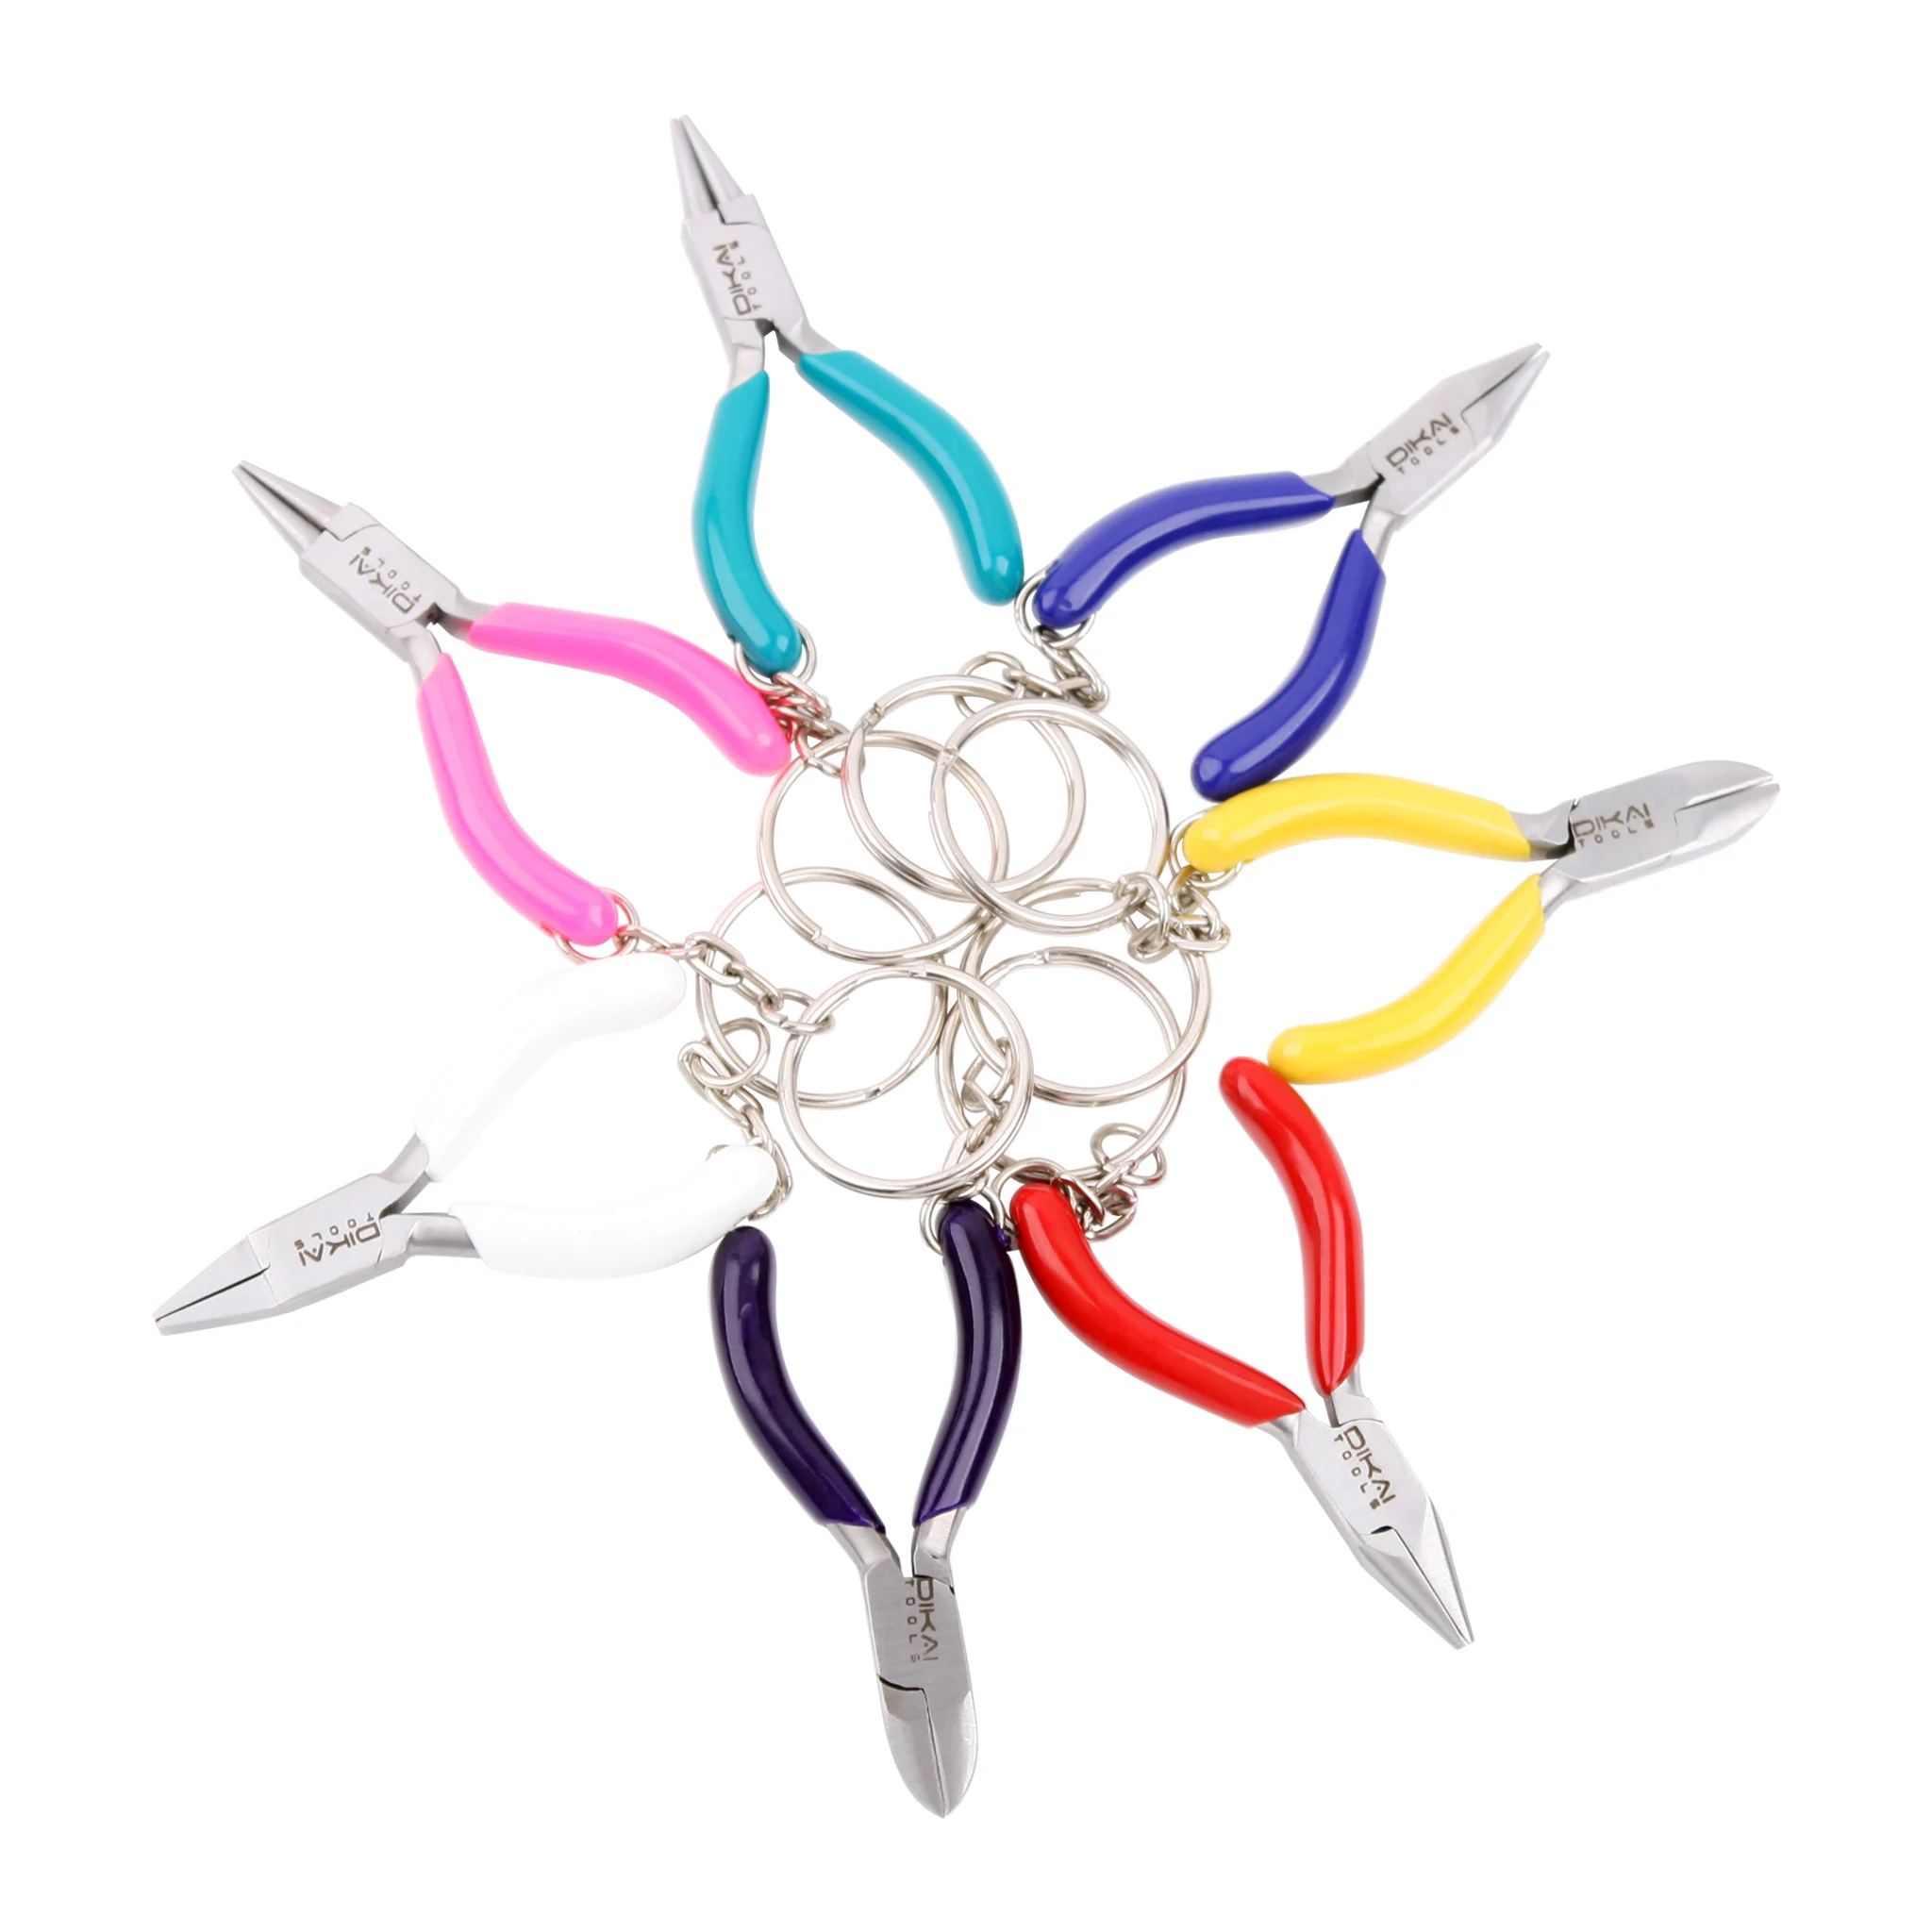 Precision Side Cutters Hand Tools Jewelry Pliers Cutting Plier Mini Micro Wire Cutter